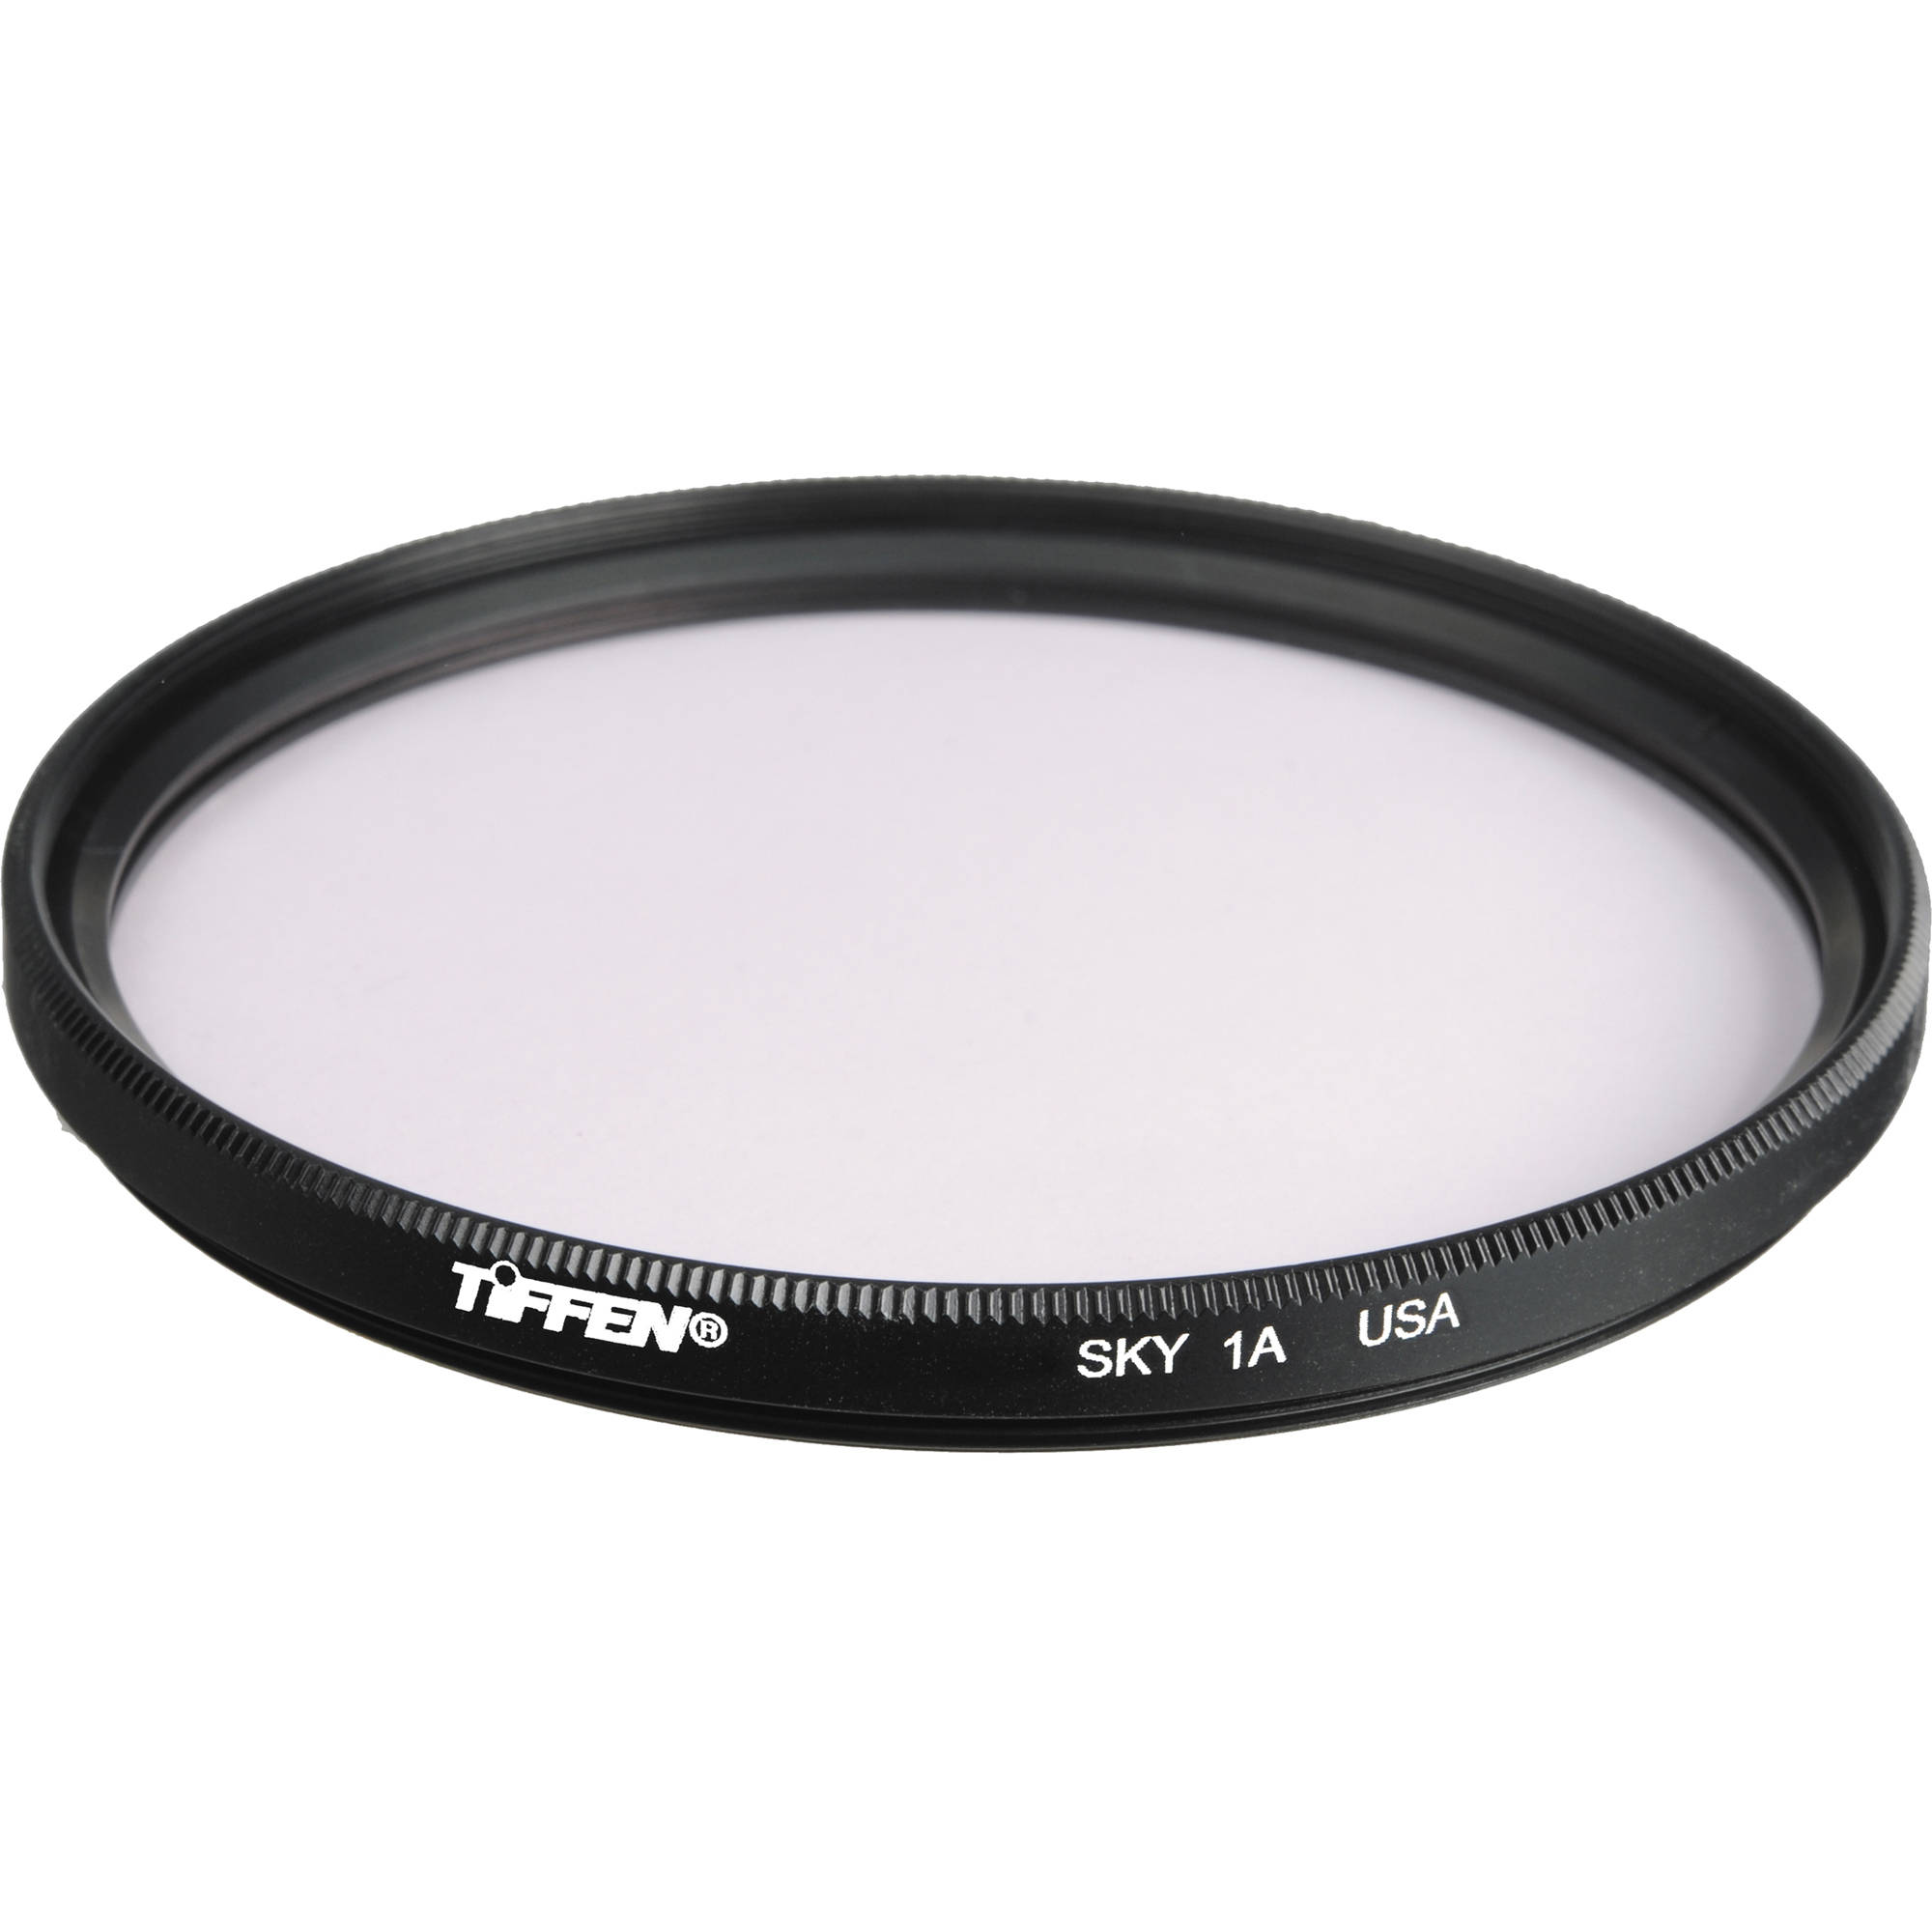 S Sigma 70 300mm F 4 5 6 Dg Os Lens Sigma 30mm F 1 4 Dc Hsm Lens 62mm Pro Series Multi Coated High Resolution Polarized Filter For Sigma 18 250mm F3 5 6 3 Dc Macro Os Hsm Sigma 105mm F 2 8